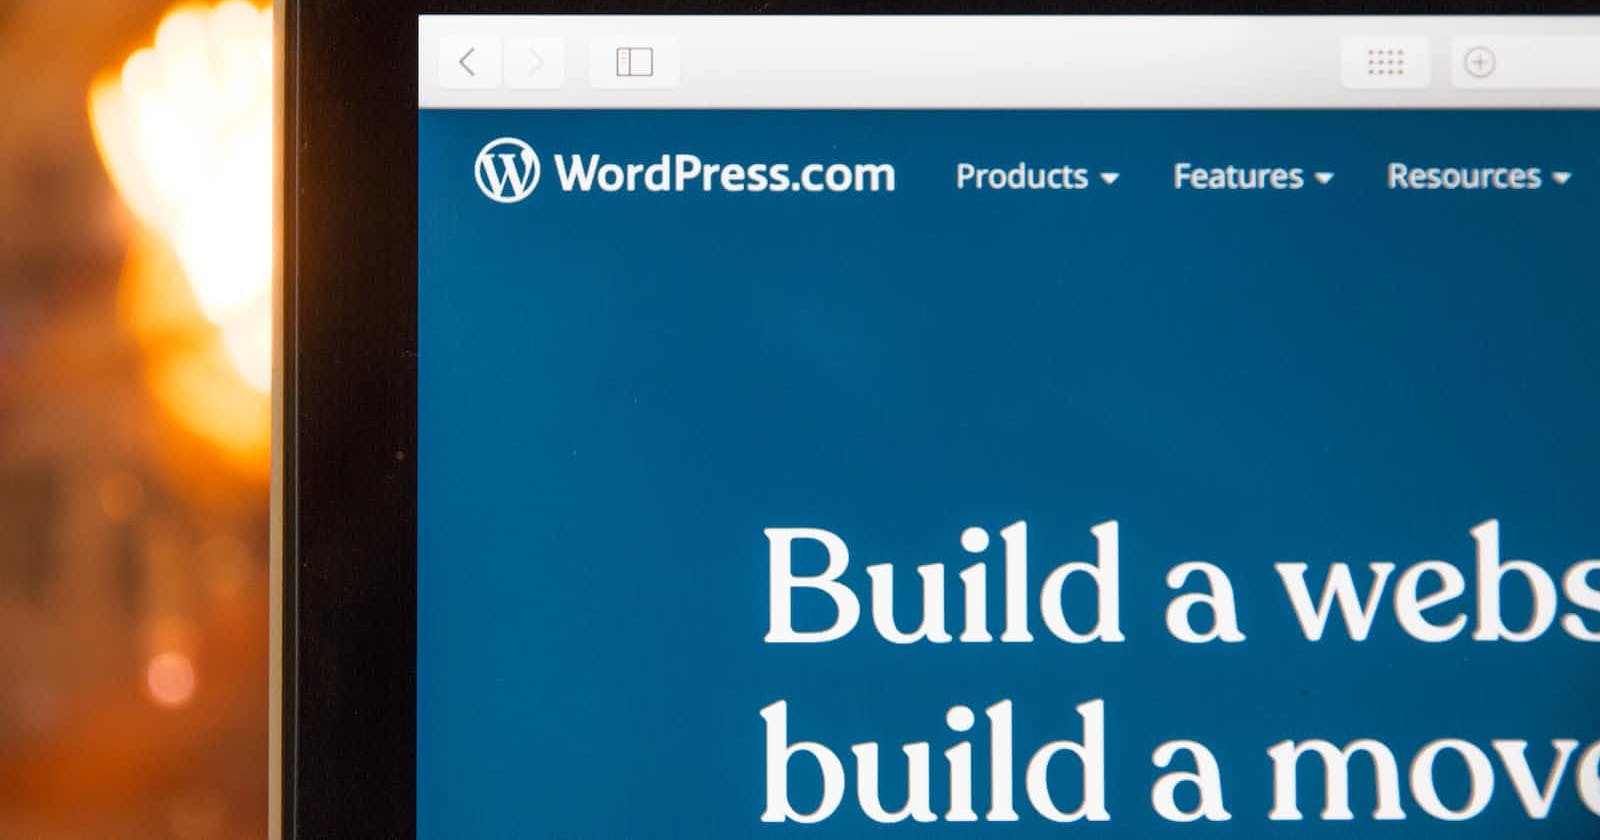 How To Install WordPress Locally In 5 Minutes - In Windows